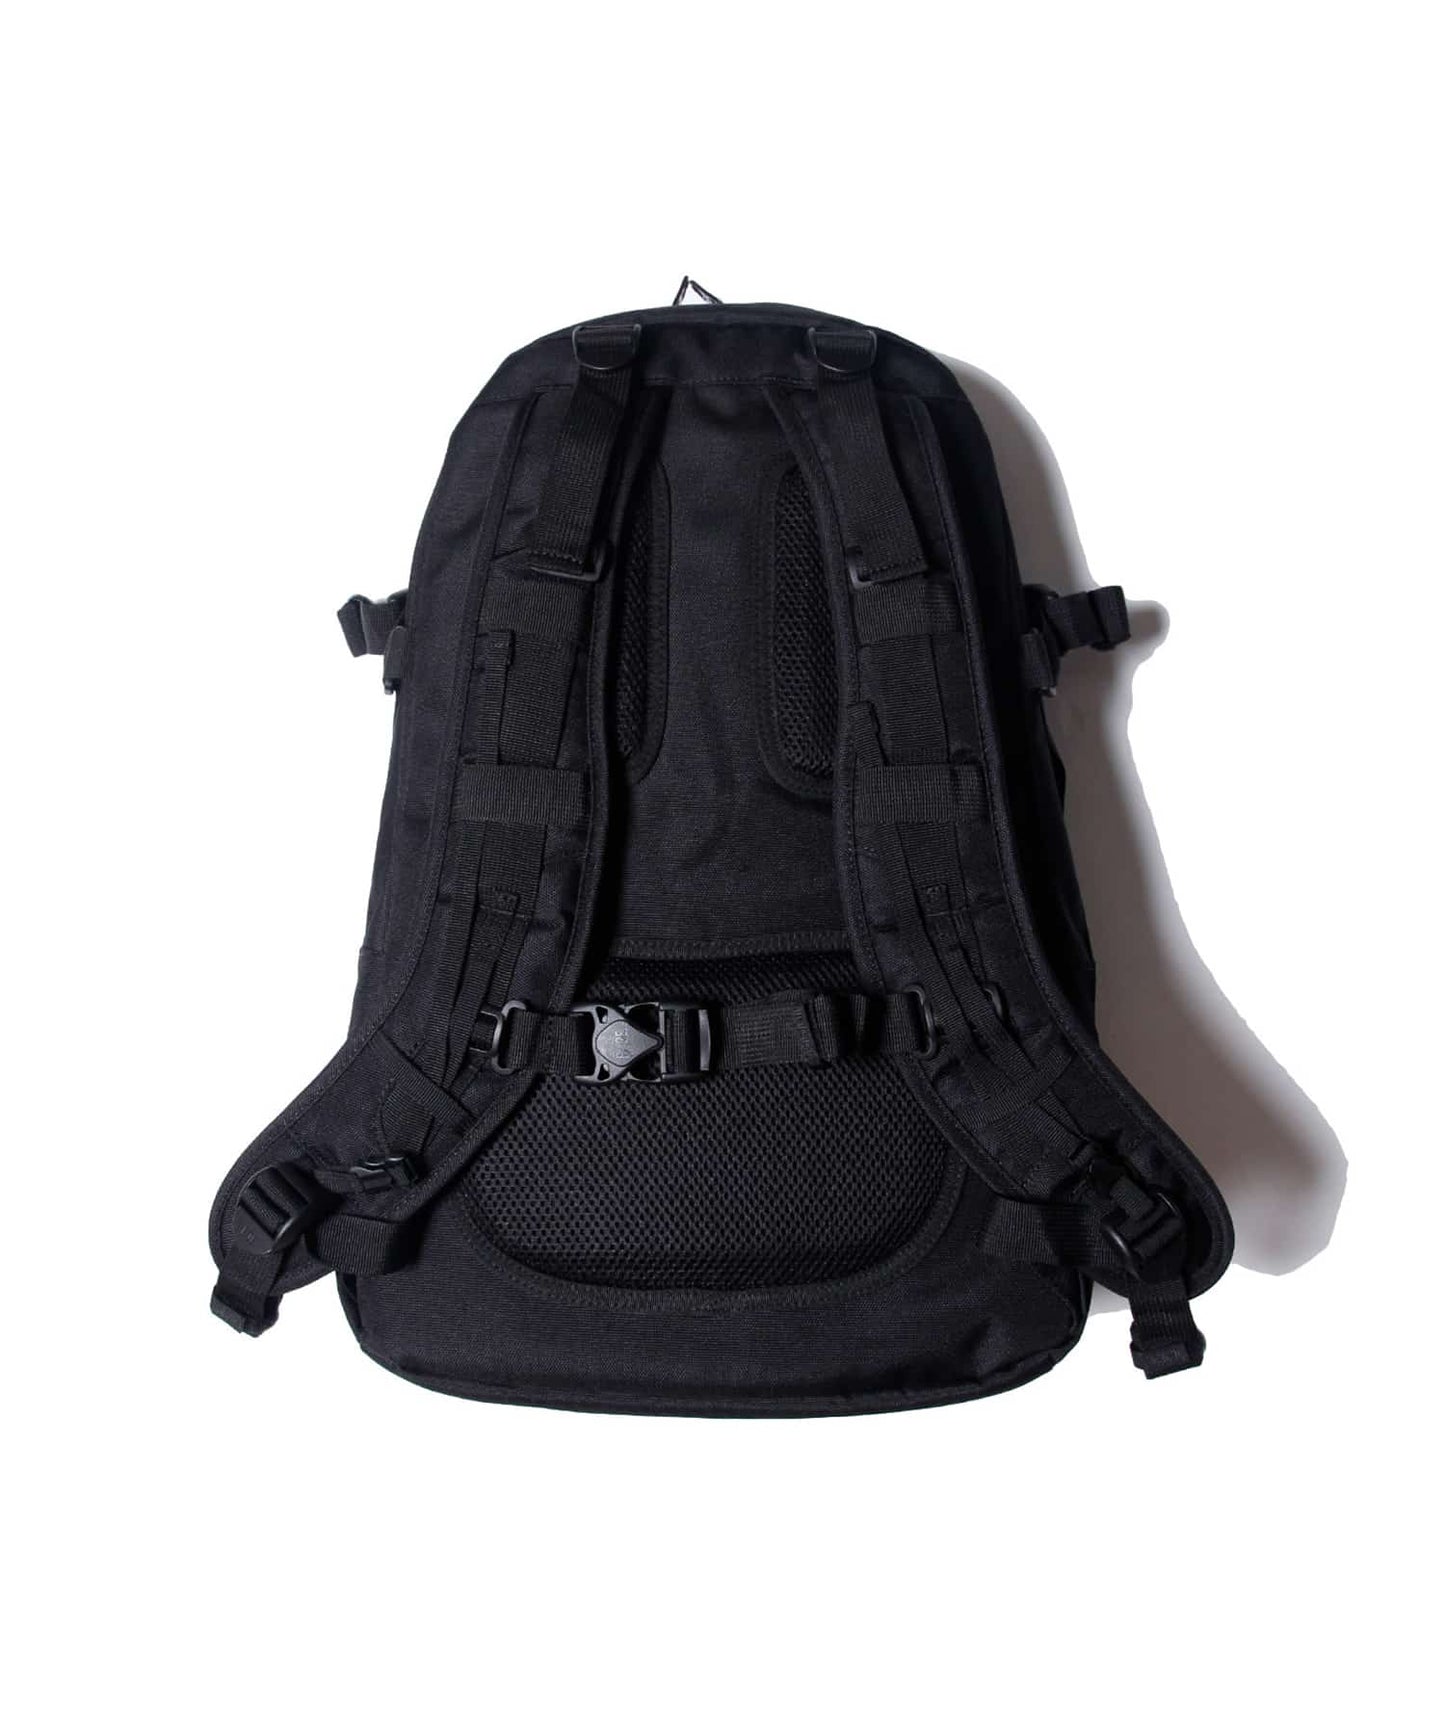 F/CE. 950 TRAVEL BACKPACK